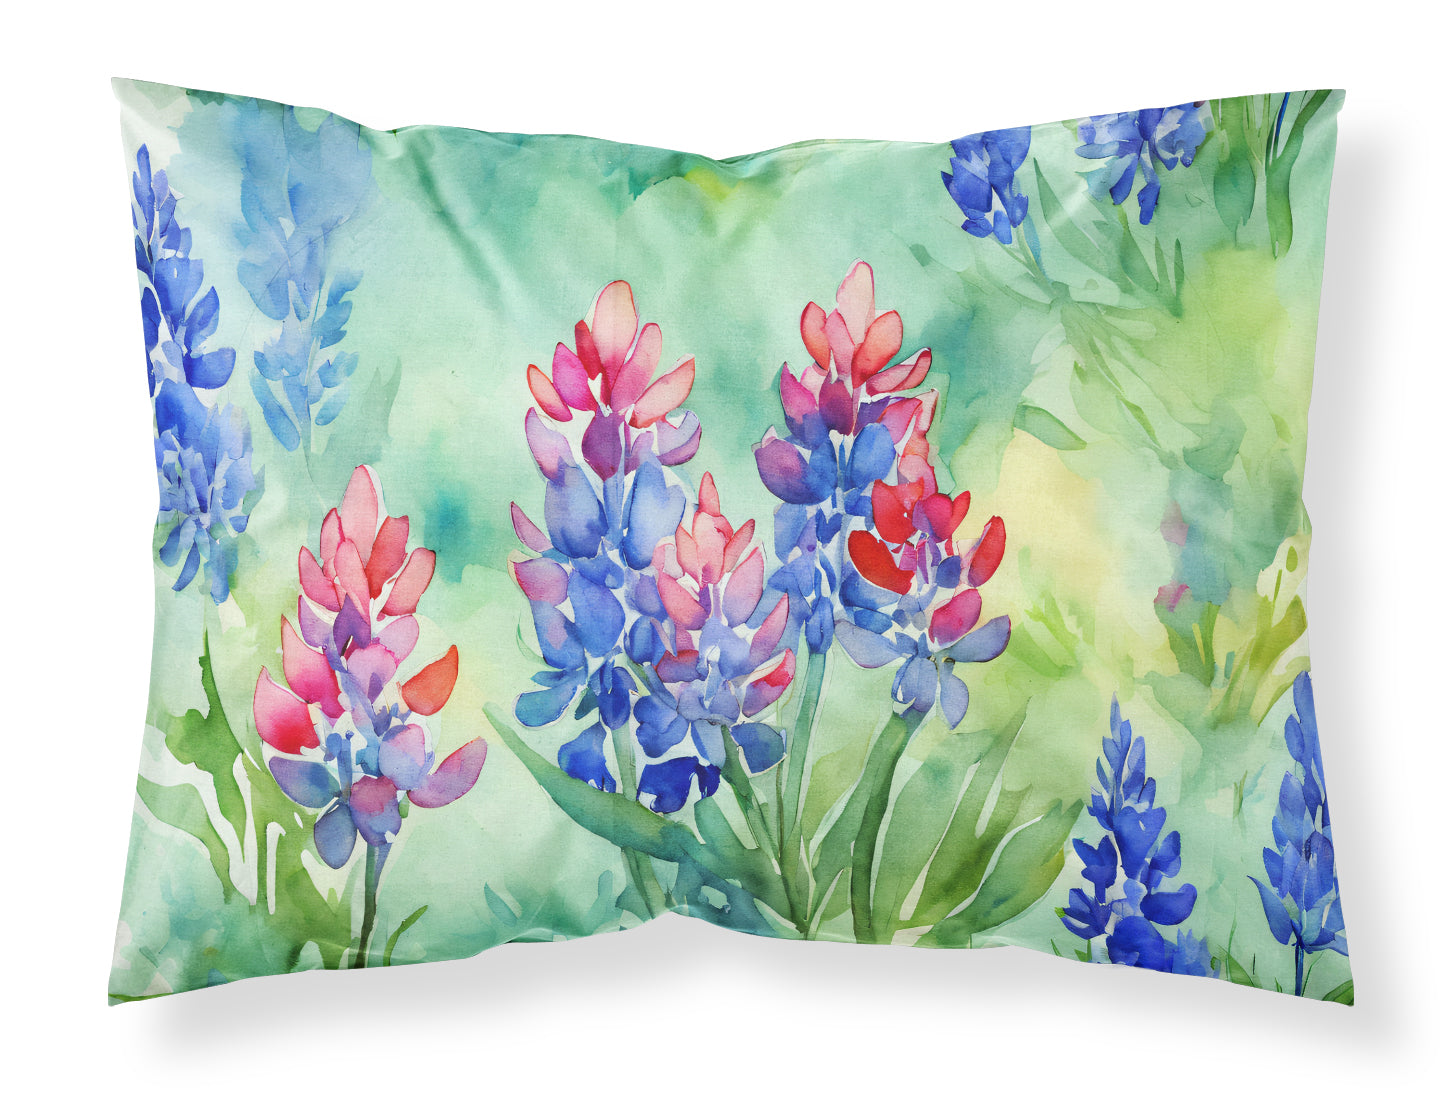 Buy this Texas Bluebonnets in Watercolor Fabric Standard Pillowcase